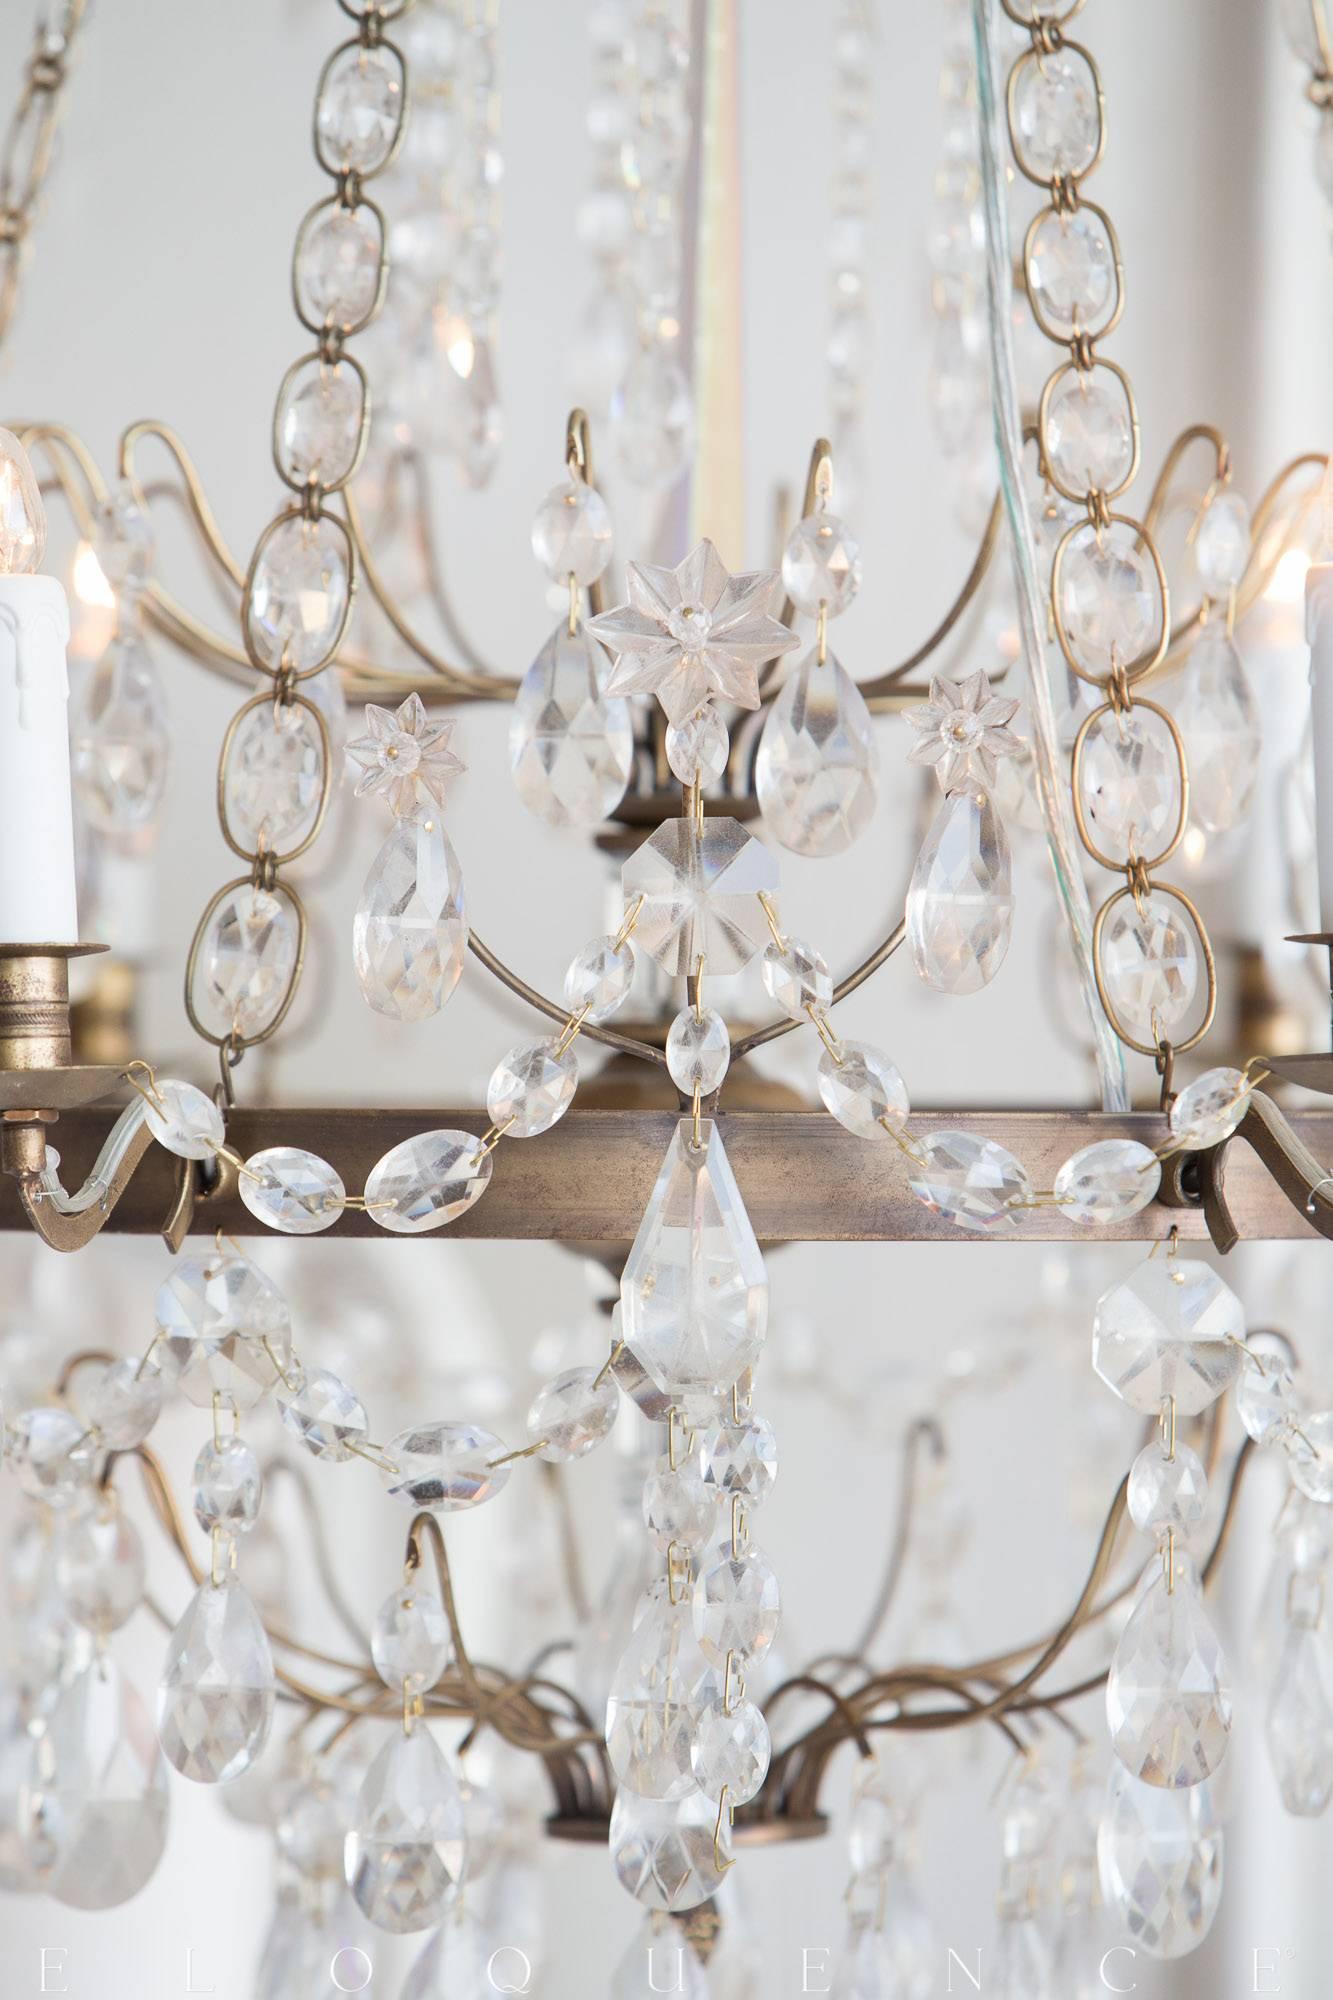 Eloquence® Albertina Chandelier in Burnished Iron In Excellent Condition For Sale In Los Angeles, CA